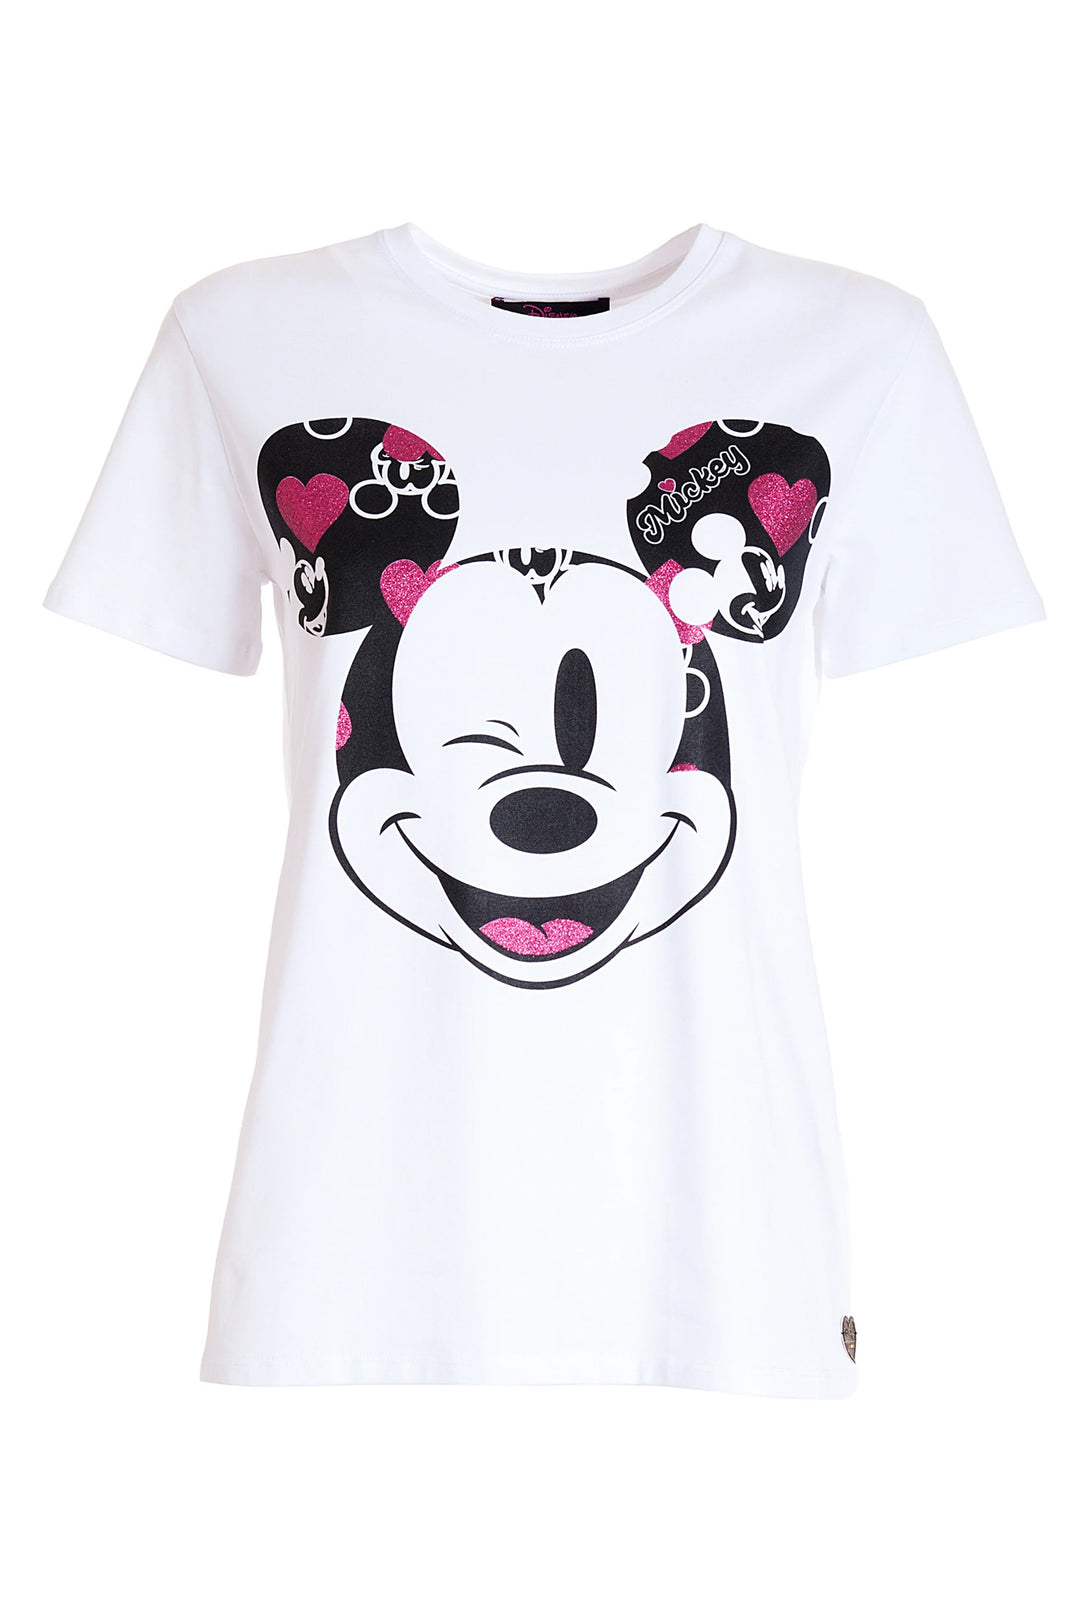 FRACOMINA T-shirt regular bianca in jersey con stampa Mickey Mouse - Mancinelli 1954